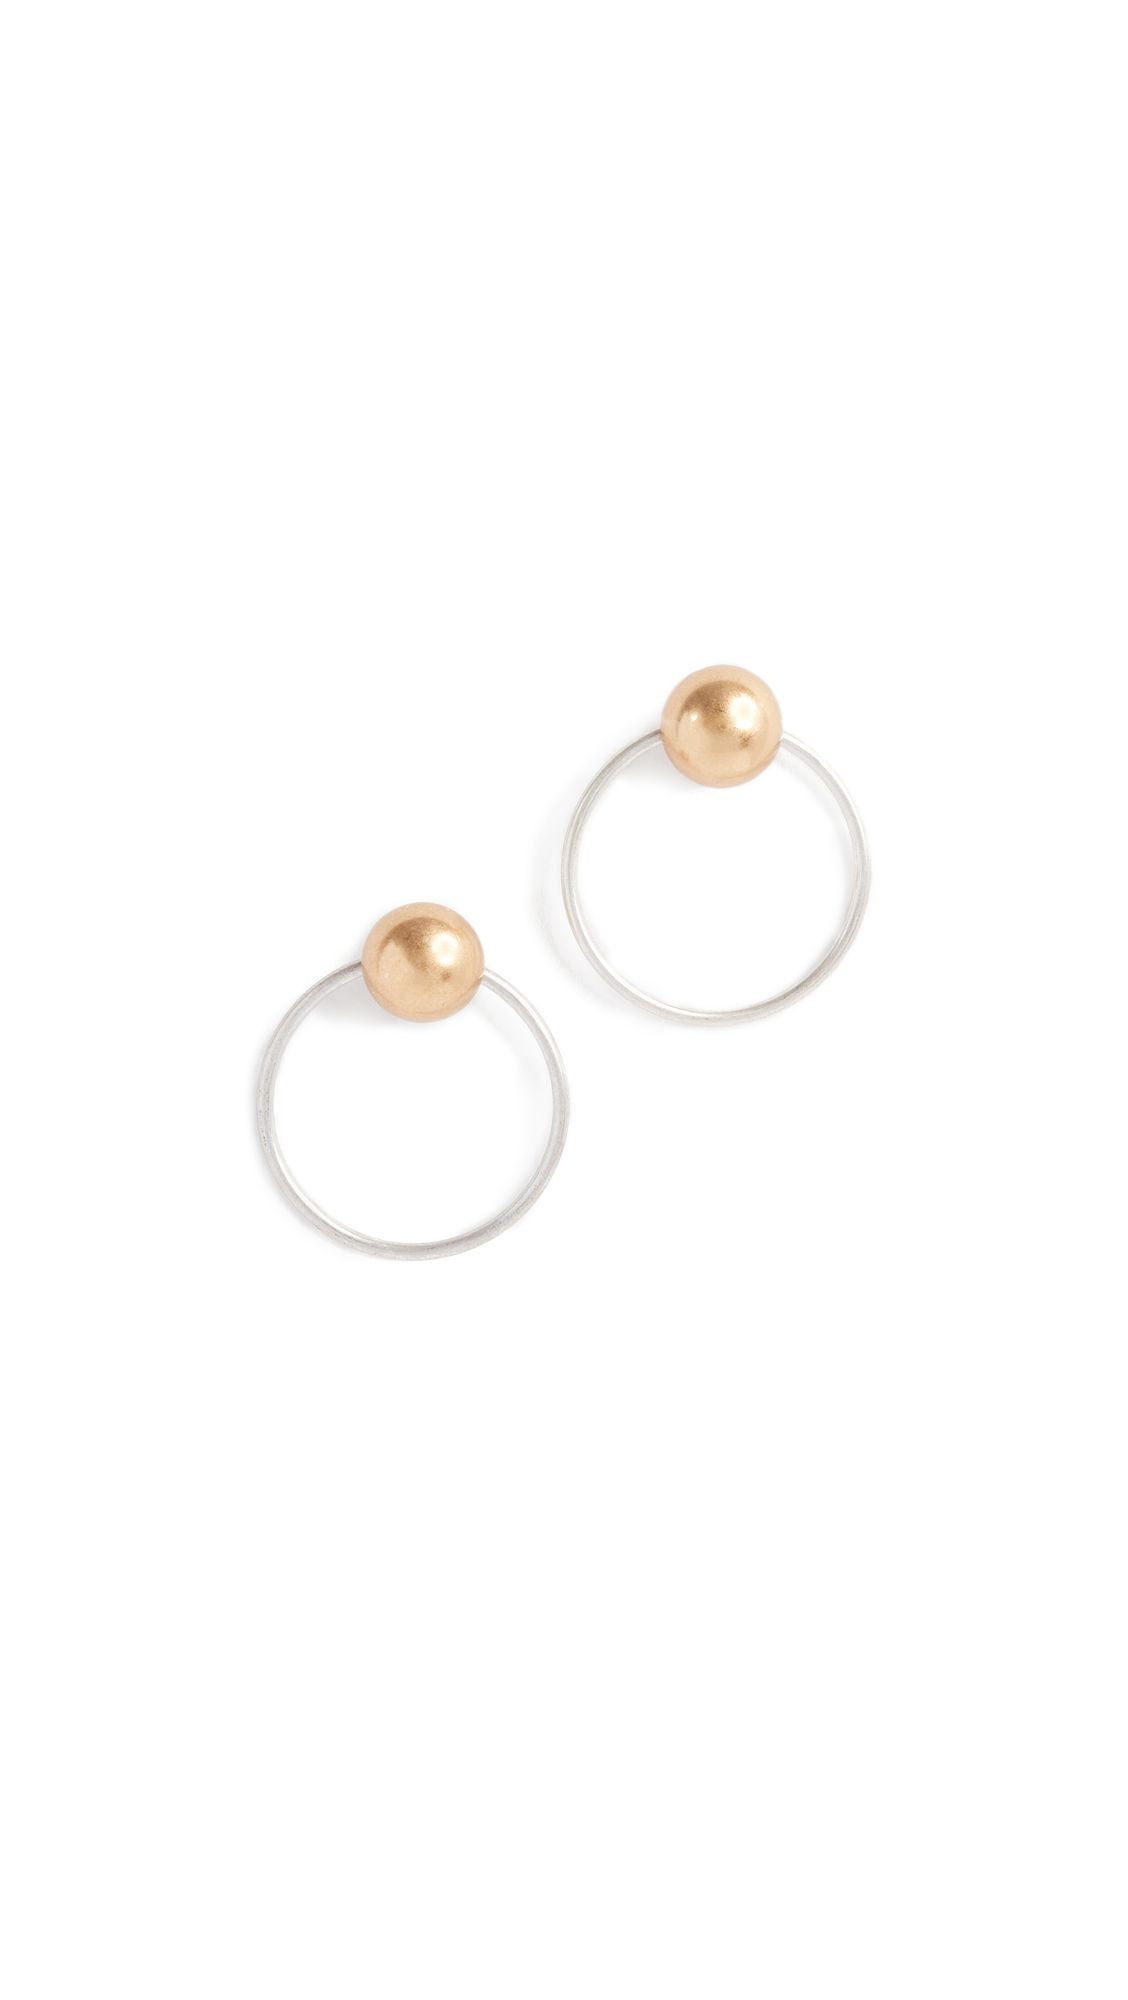 Madewell Mixed Metal Front Back Earrings | Shopbop